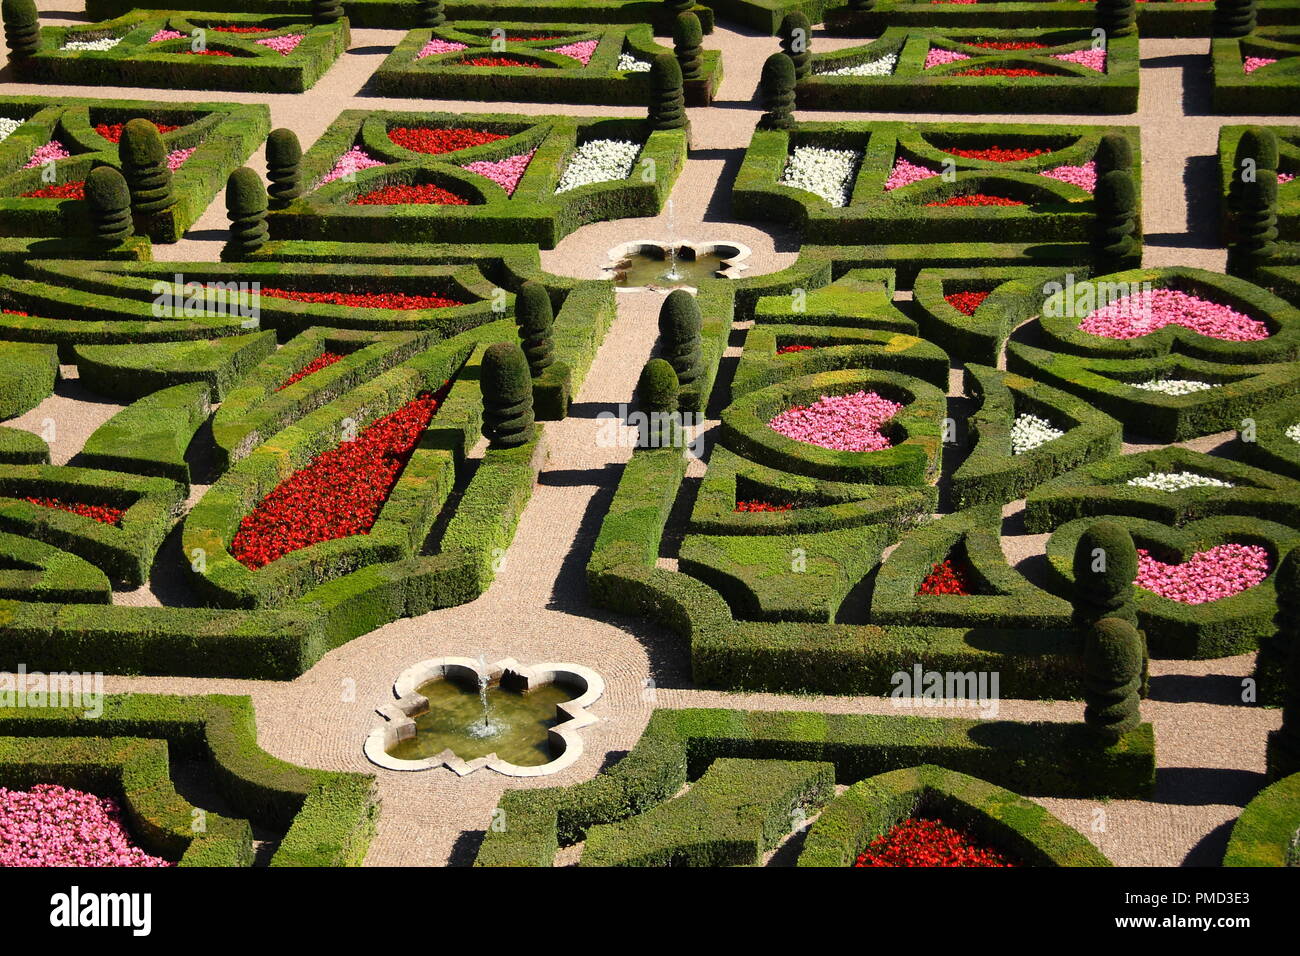 Obe of the most beautiful french gardens in "Chateau de Villandry", Loire Valley, France. Stock Photo